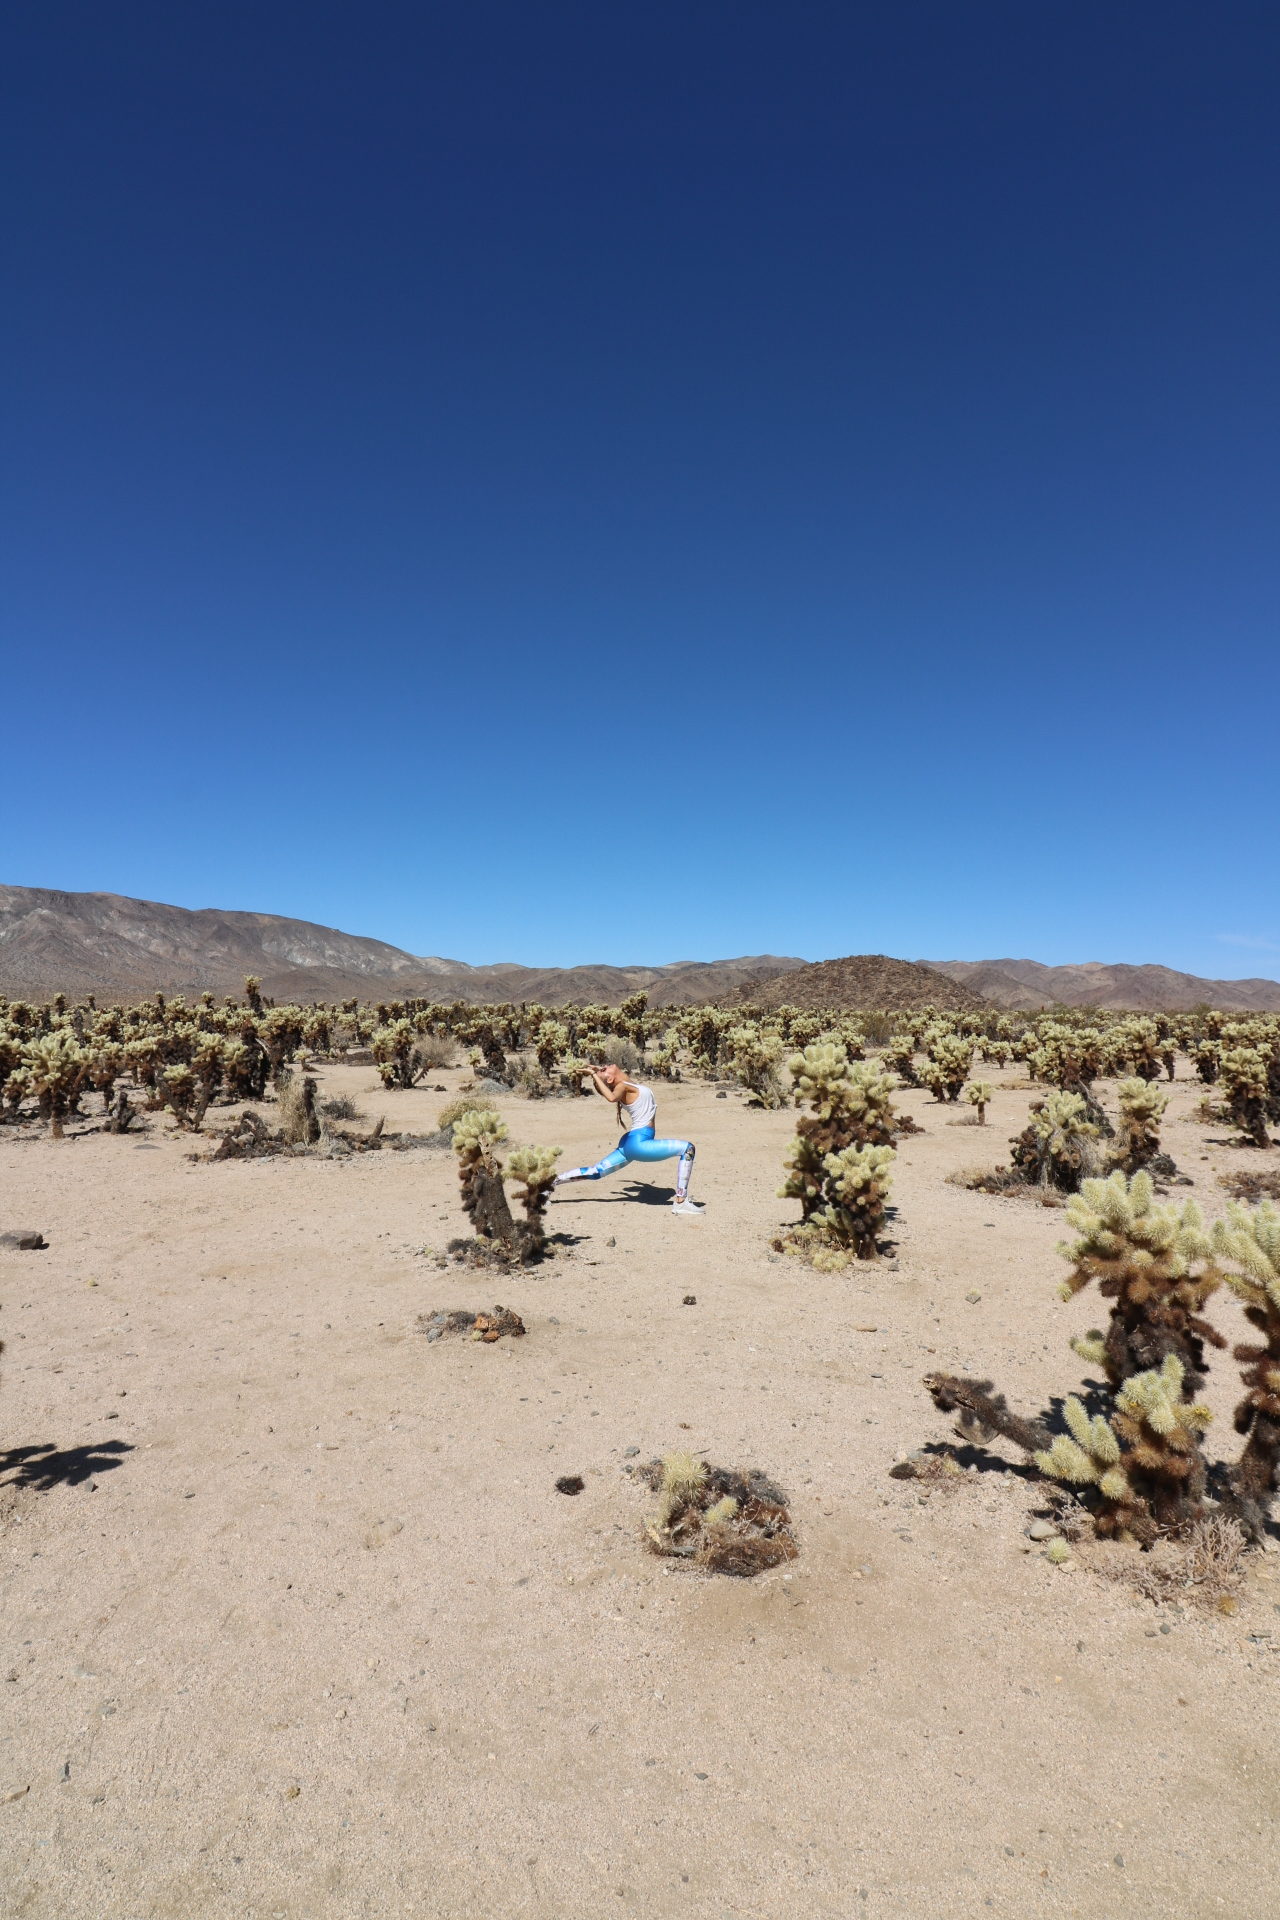 things to do in Joshua tree park